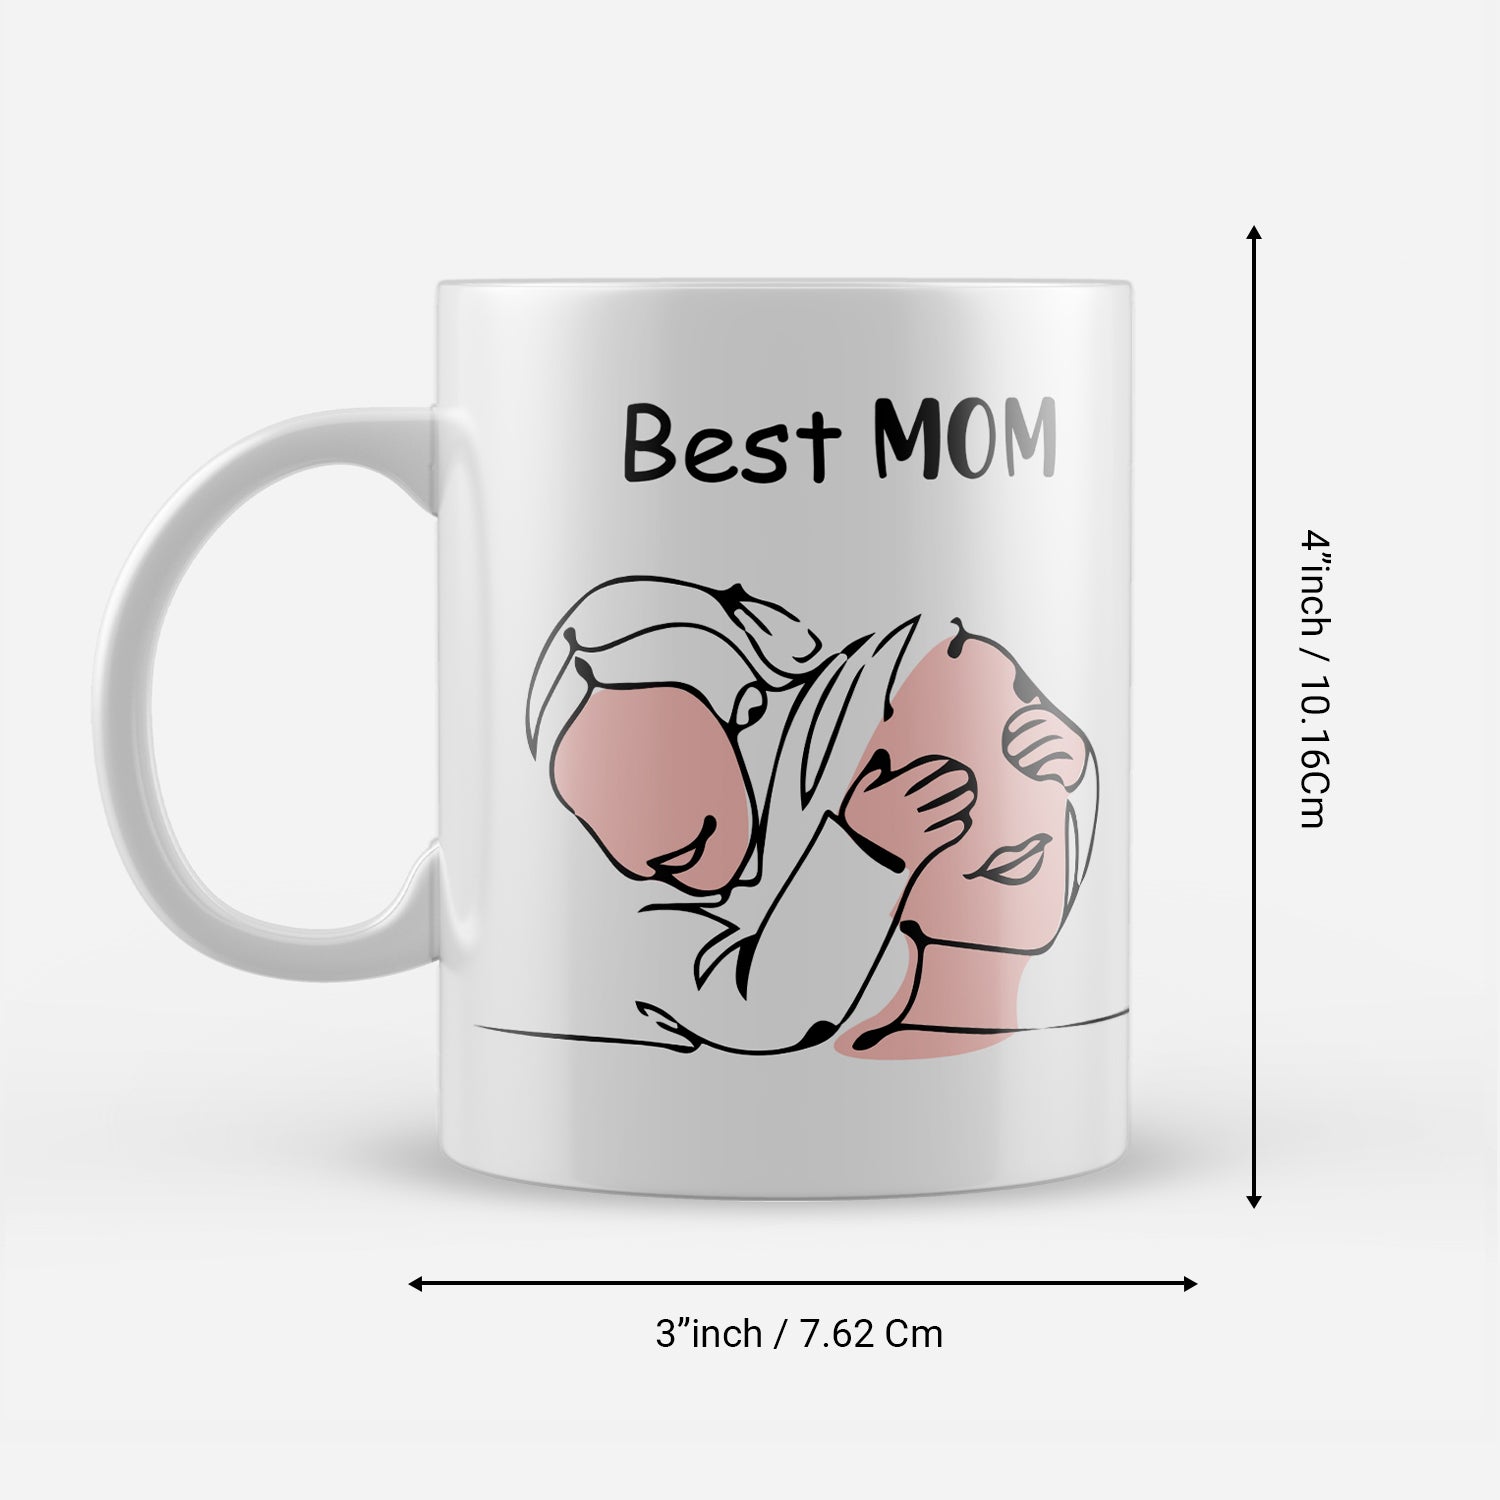 "Best MOM" Mother's Day theme Ceramic Coffee Mugs 3